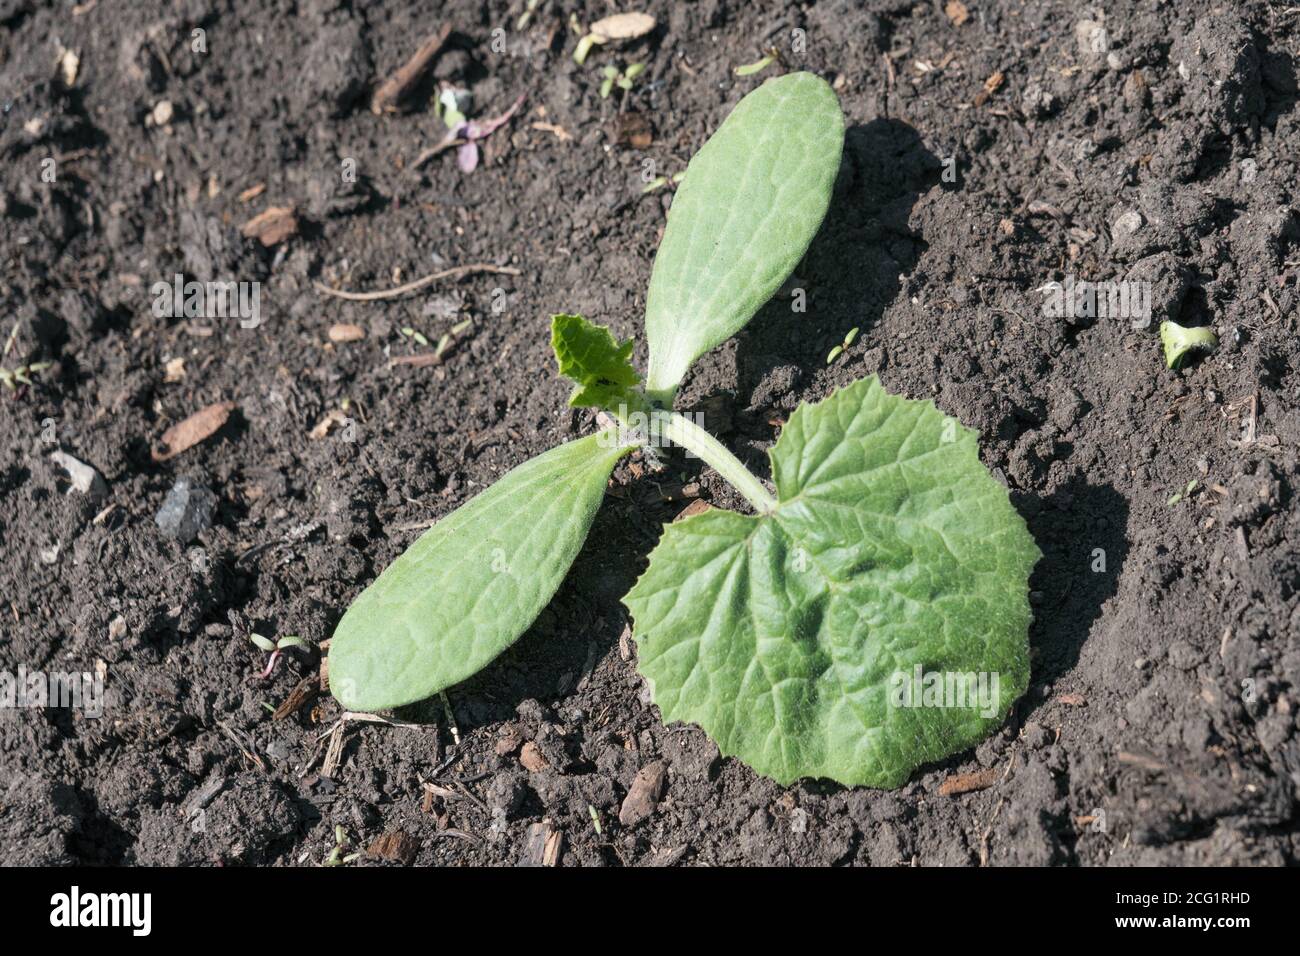 A young sprout of a white vegetable marrow grows on a bed in a vegetable garden. Stock Photo